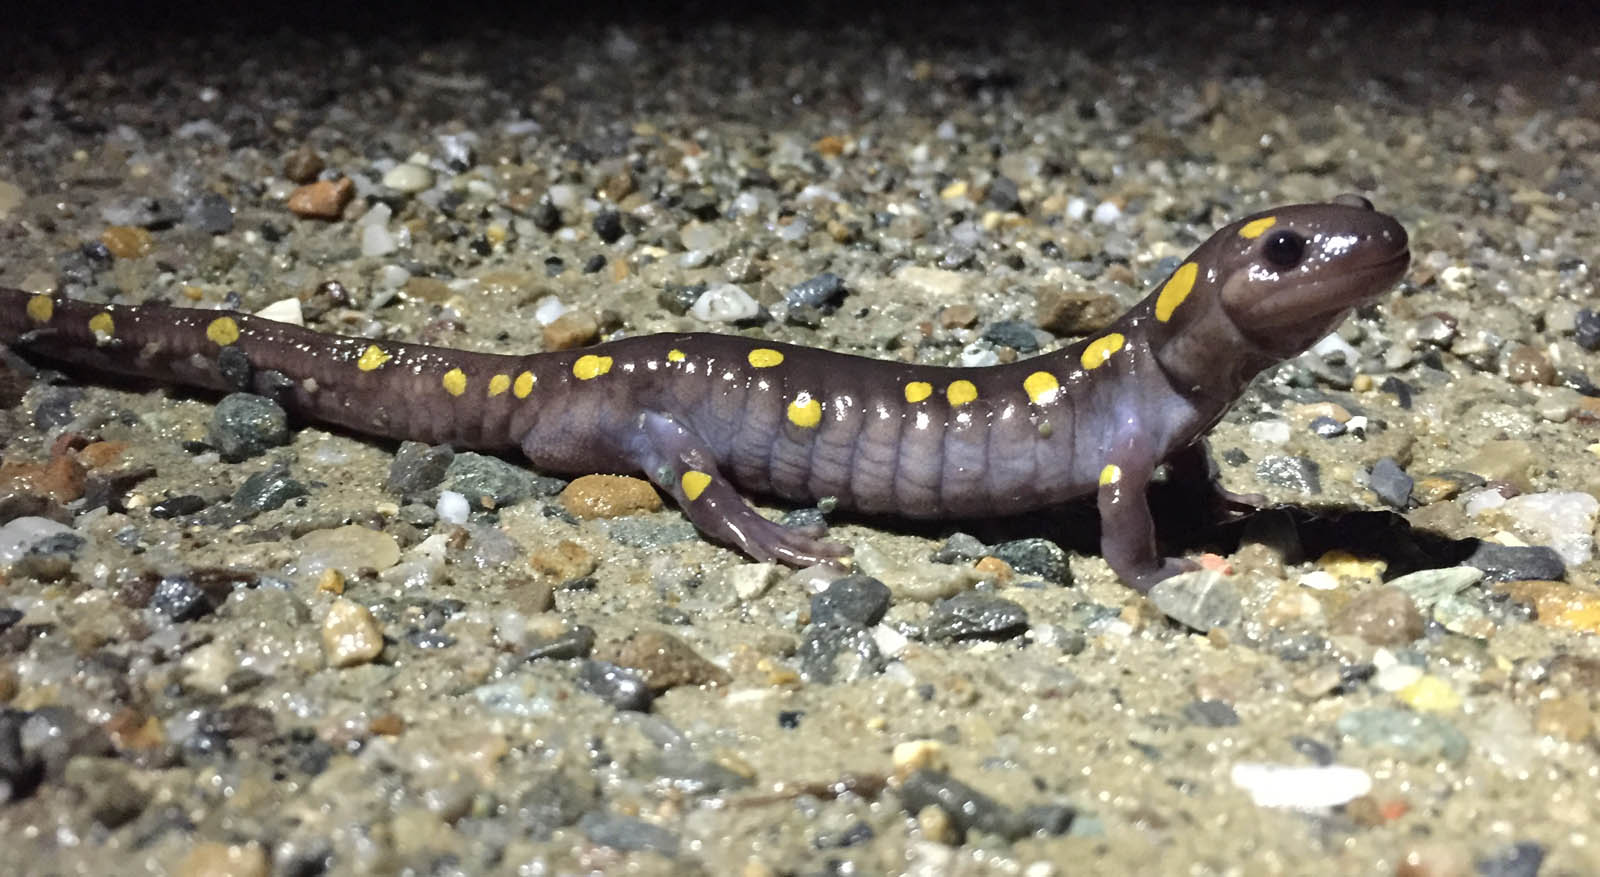 Featured image for “One dark and rainy night: Up close with Spotted Salamanders”